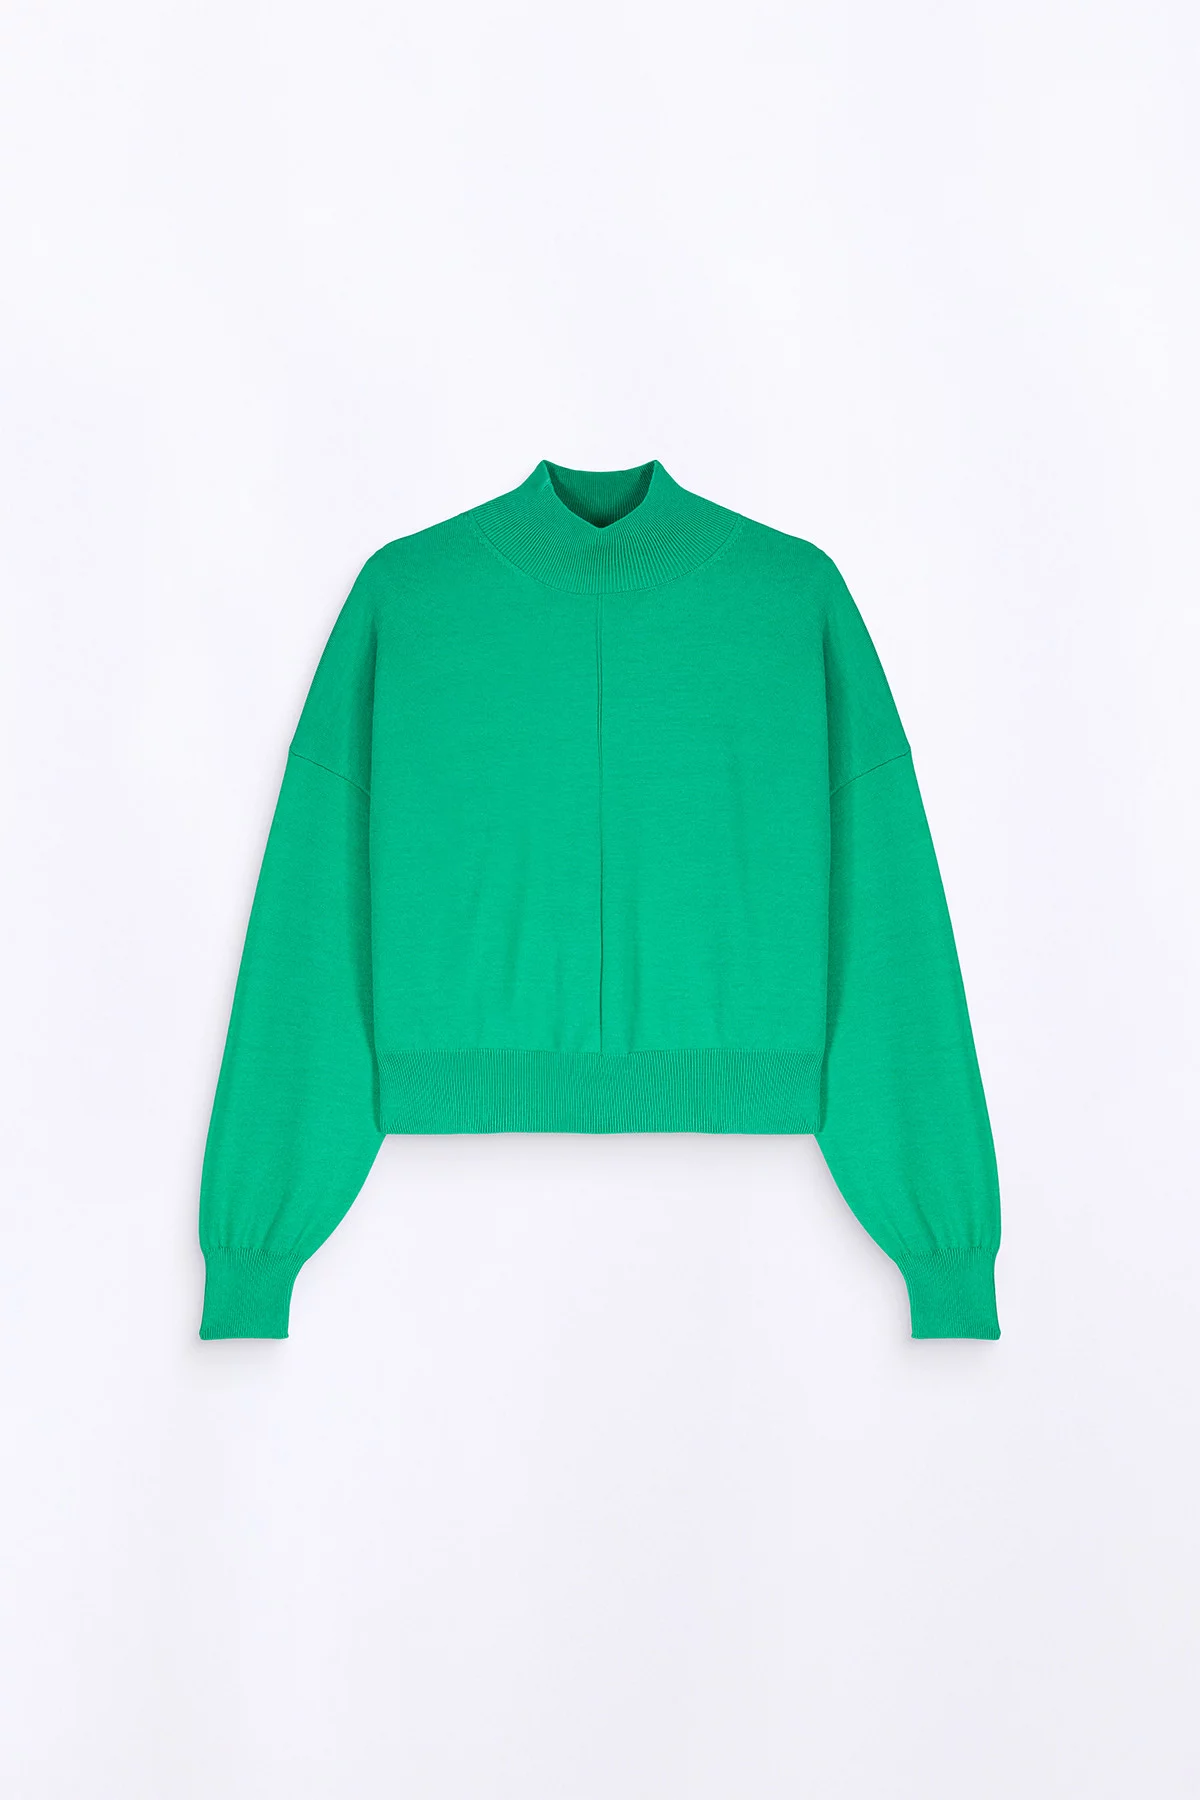 Anais Lush Green funnel neck cropped knit sweater